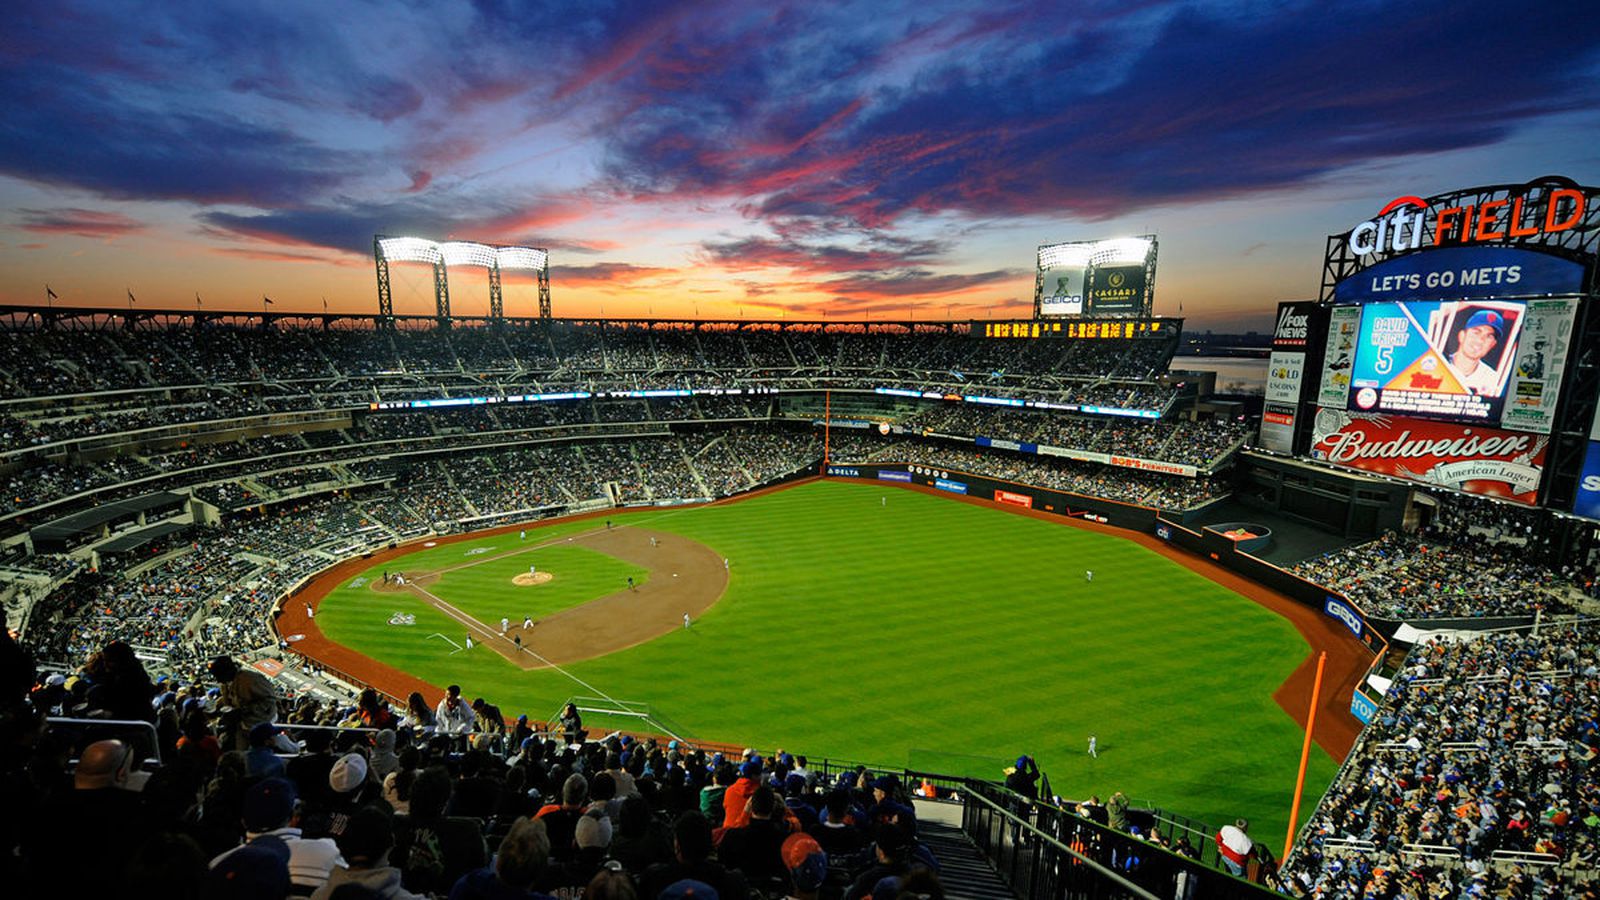 We are proud to announce our newest partnership with the NY Mets and Citi Field
